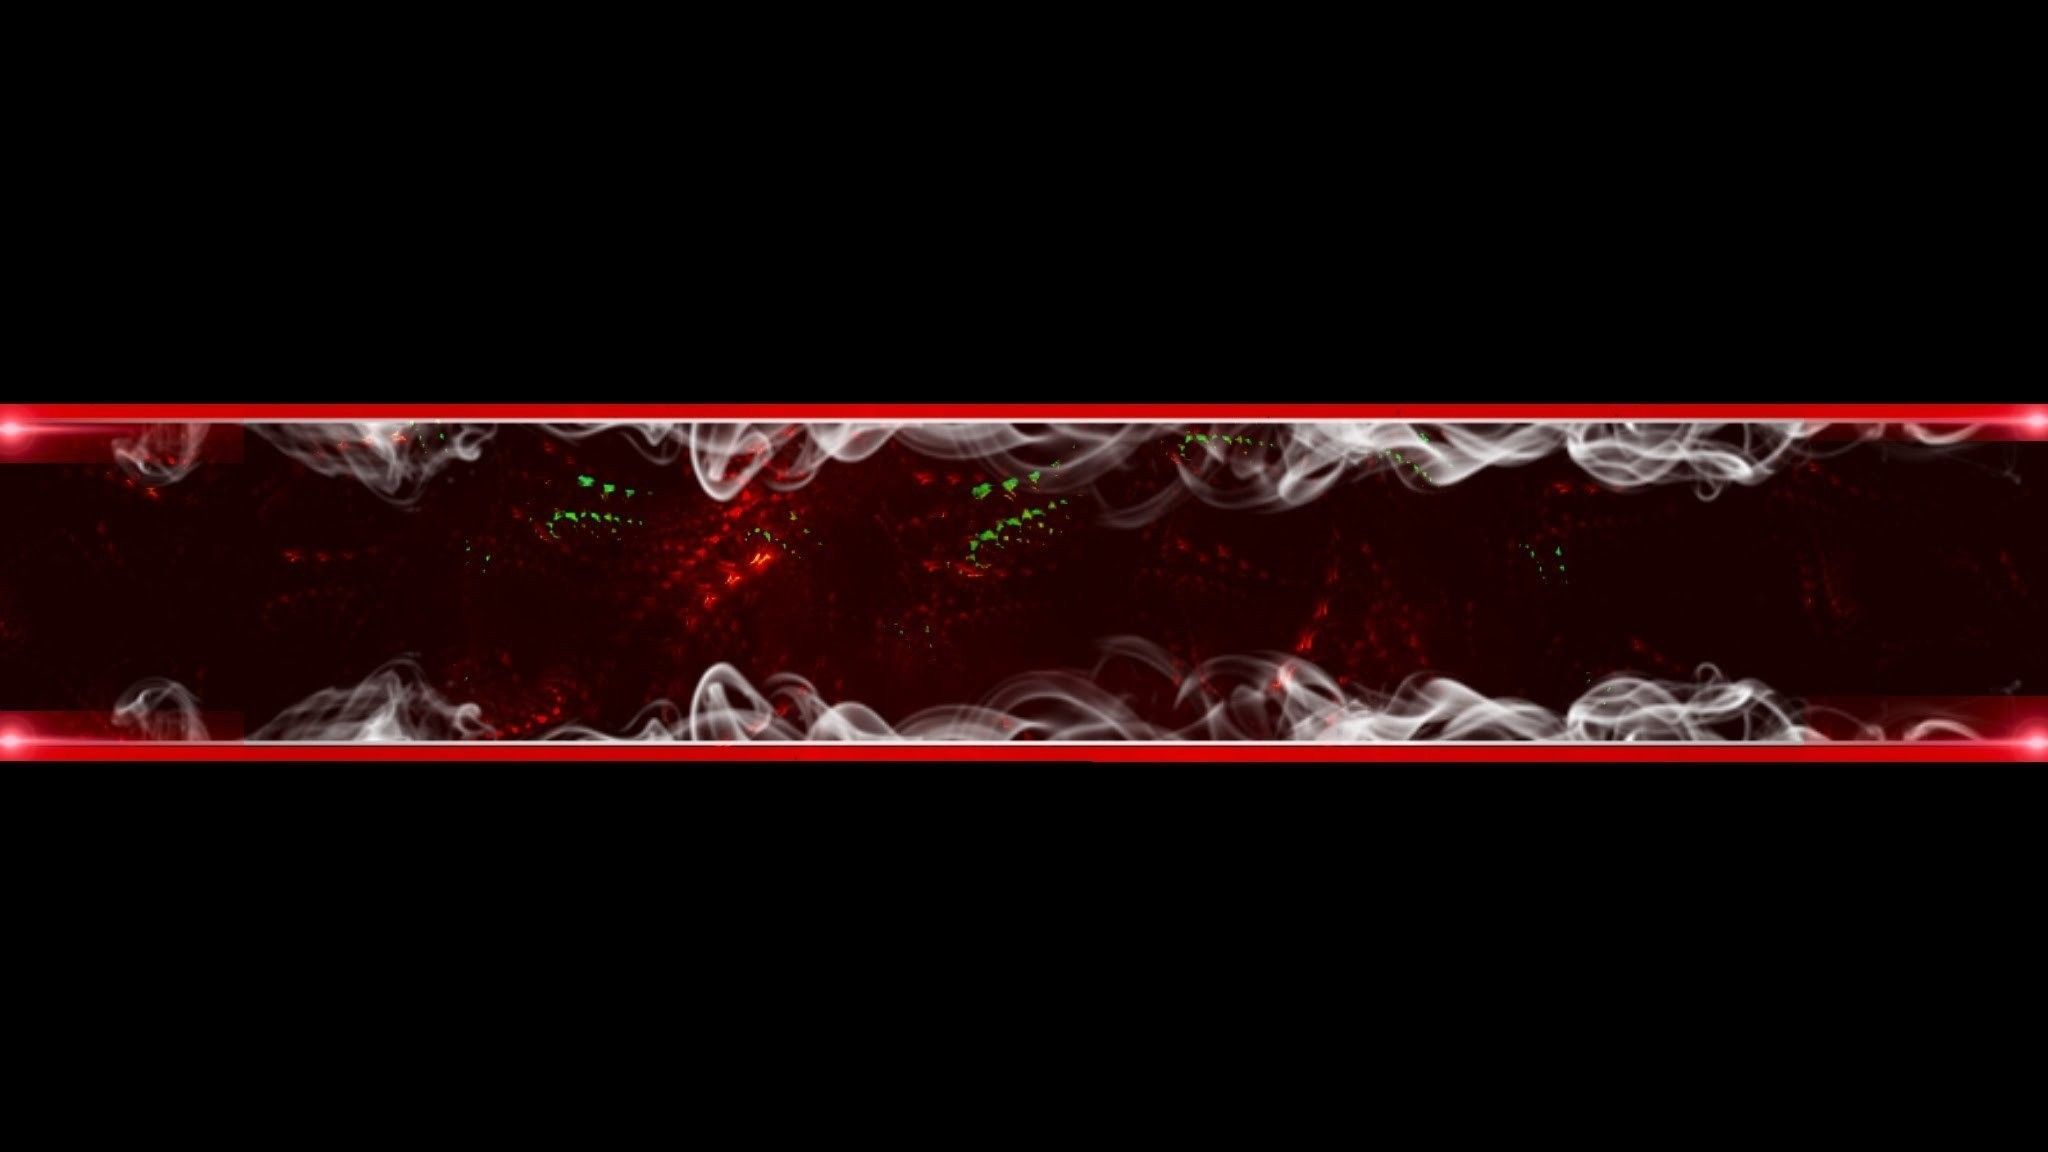 Res: 2048x Youtube Banner 2048X1152. Best Business in Banner 2048X1152 Youtu. Youtube banner background, Youtube banner , Youtube banners